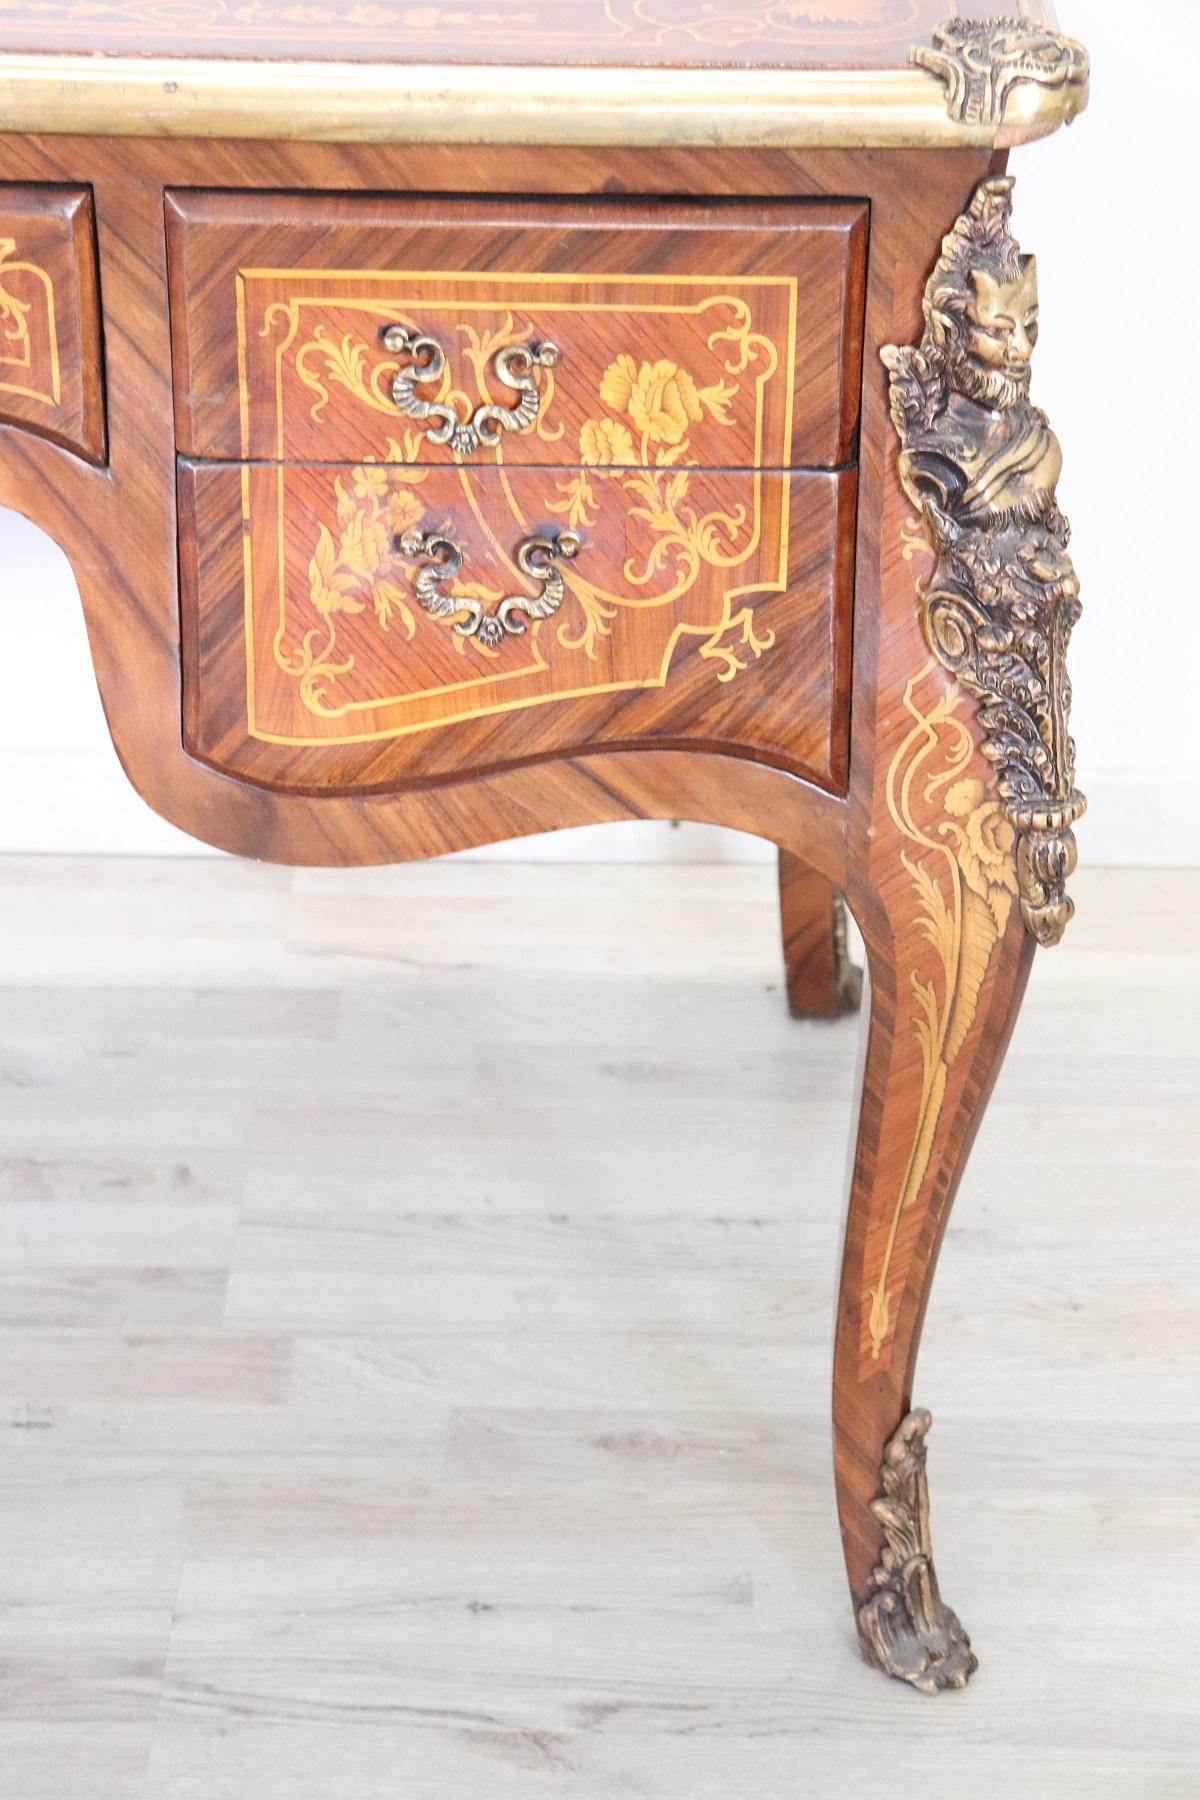 Louis XV style furniture richly adorned with gilded and chiseled bronze. The fine bois de rose wood with floral inlay on the front. The top is in precious wood inlay. Mobile very elegant but also practical for use with five comfortable drawers.